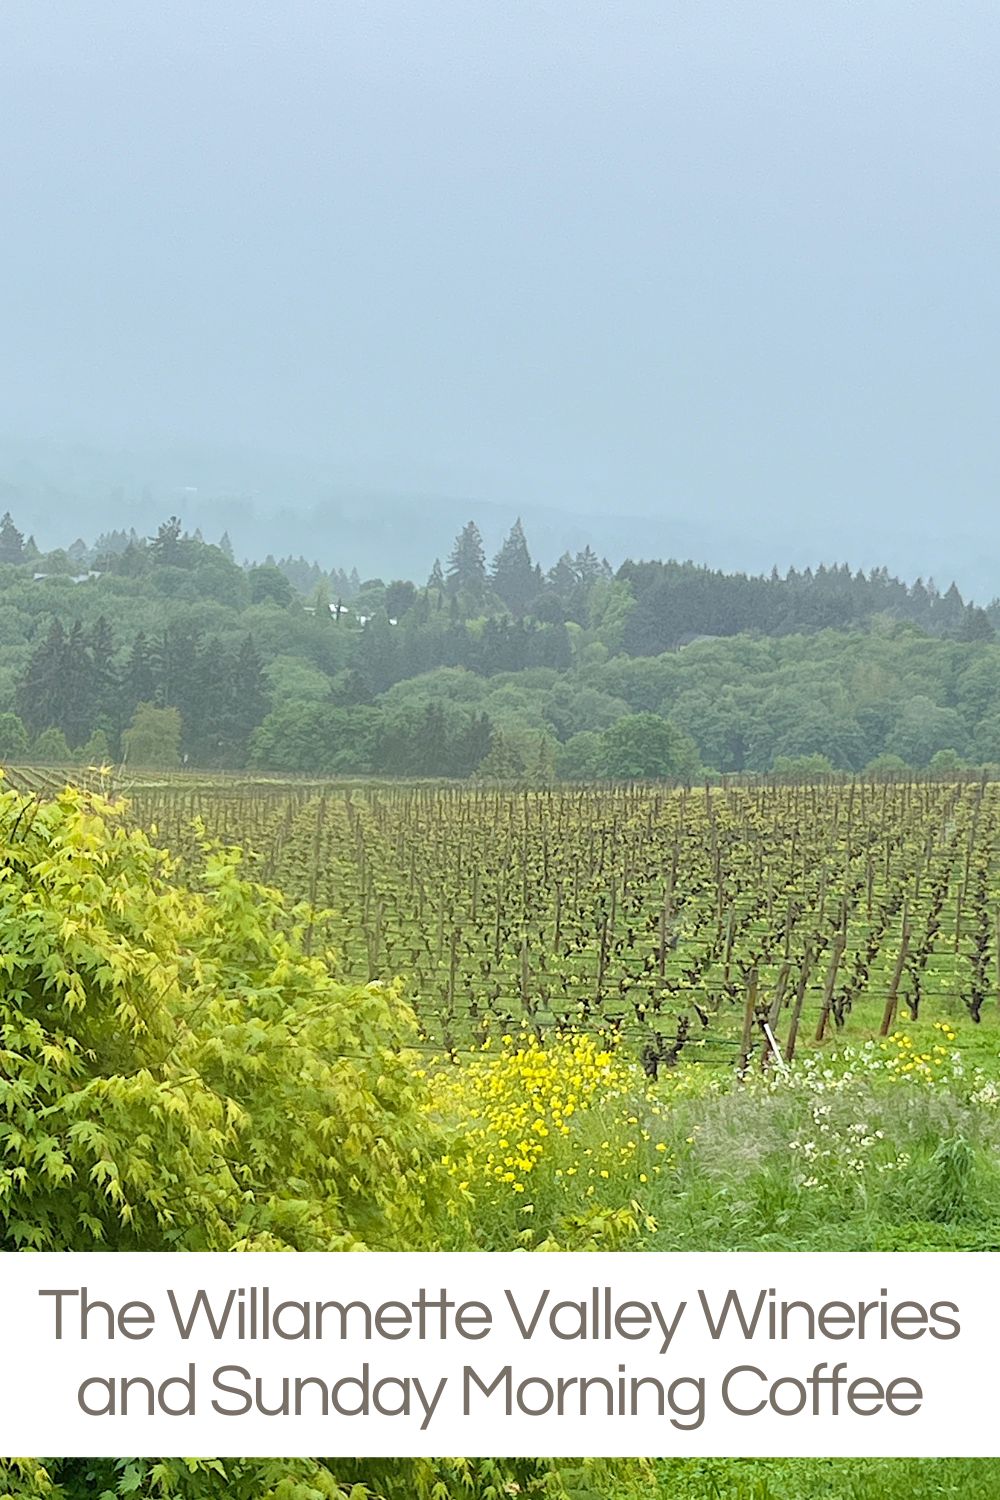 We just spent a weekend with Dave's family in Portland and enjoyed a trip to the Willamette Valley and visited three Willamette Valley wineries. Wow!